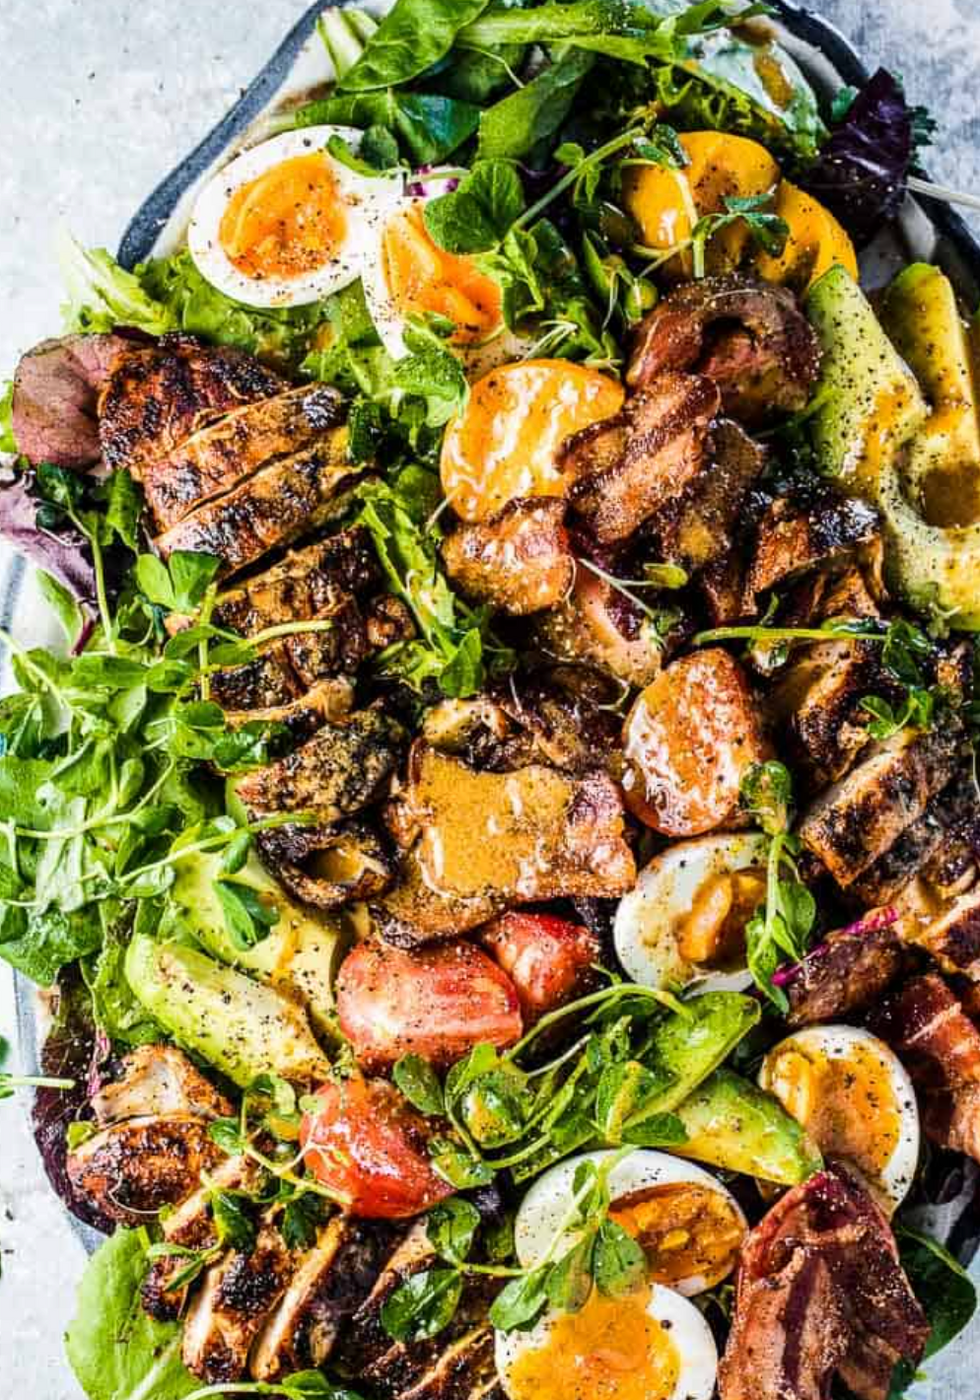 Grilled Chicken Cobb Salad with Warm Bacon Vinaigrette